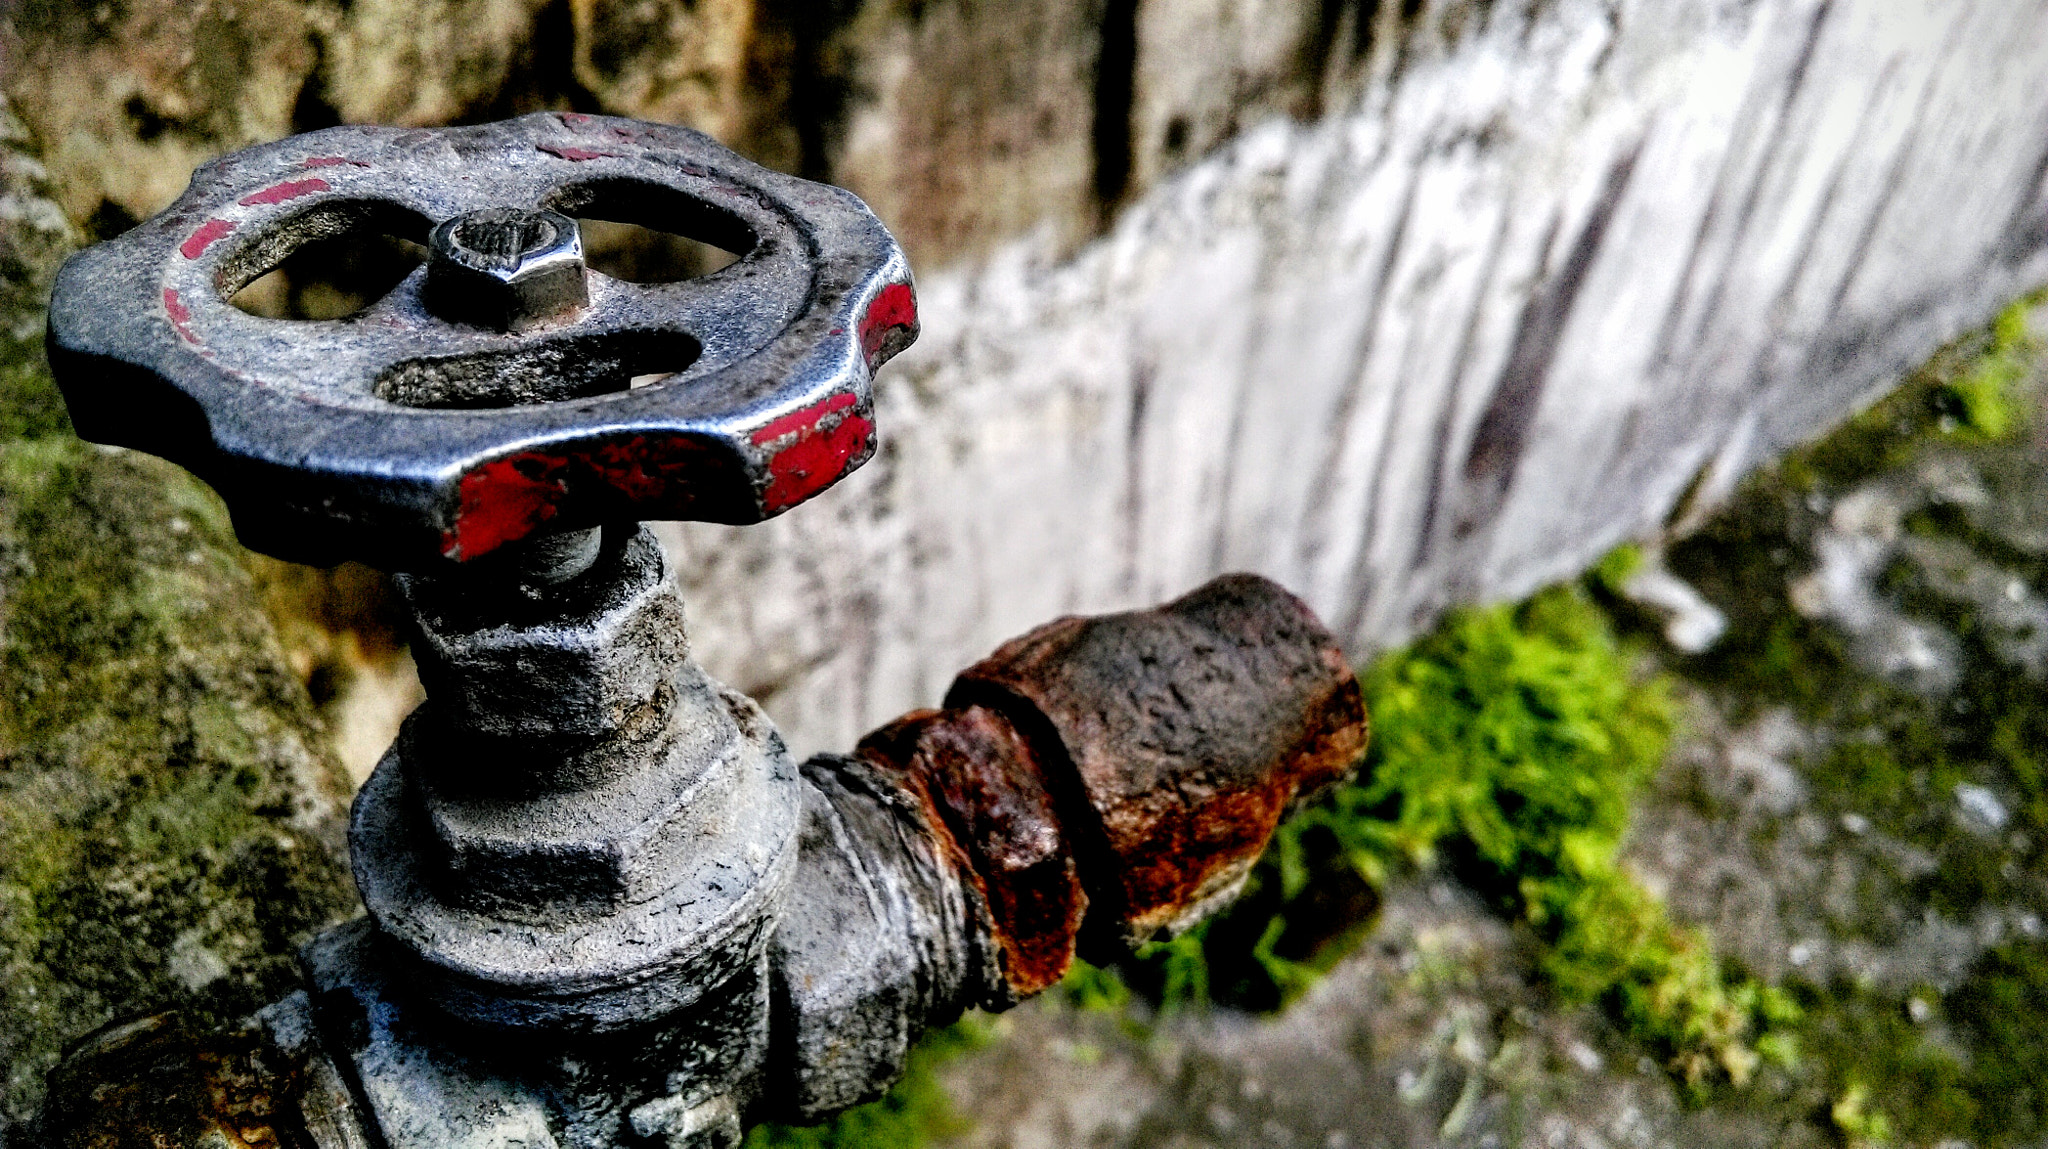 HTC DESIRE 820 DUAL SIM sample photo. An abandoned tap photography